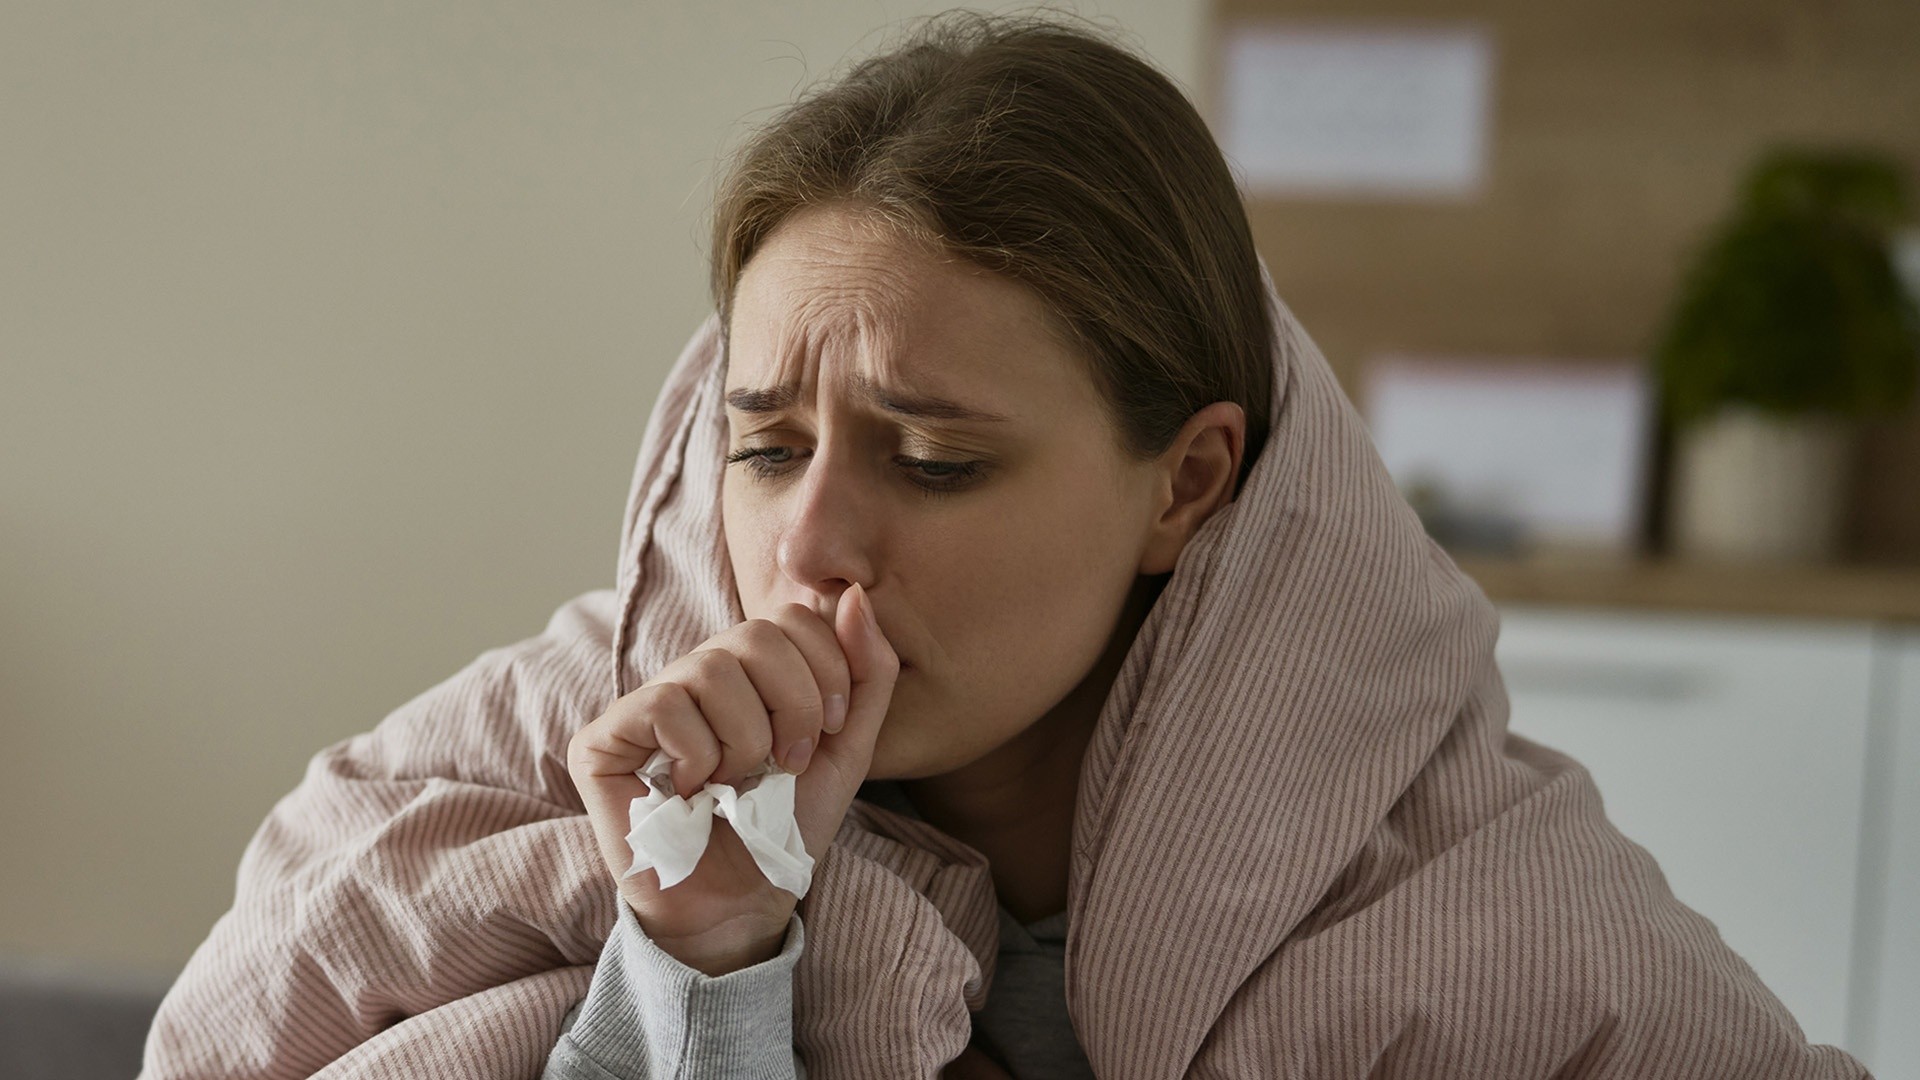 Respiratory illnesses spike across US ahead of New Year's holiday